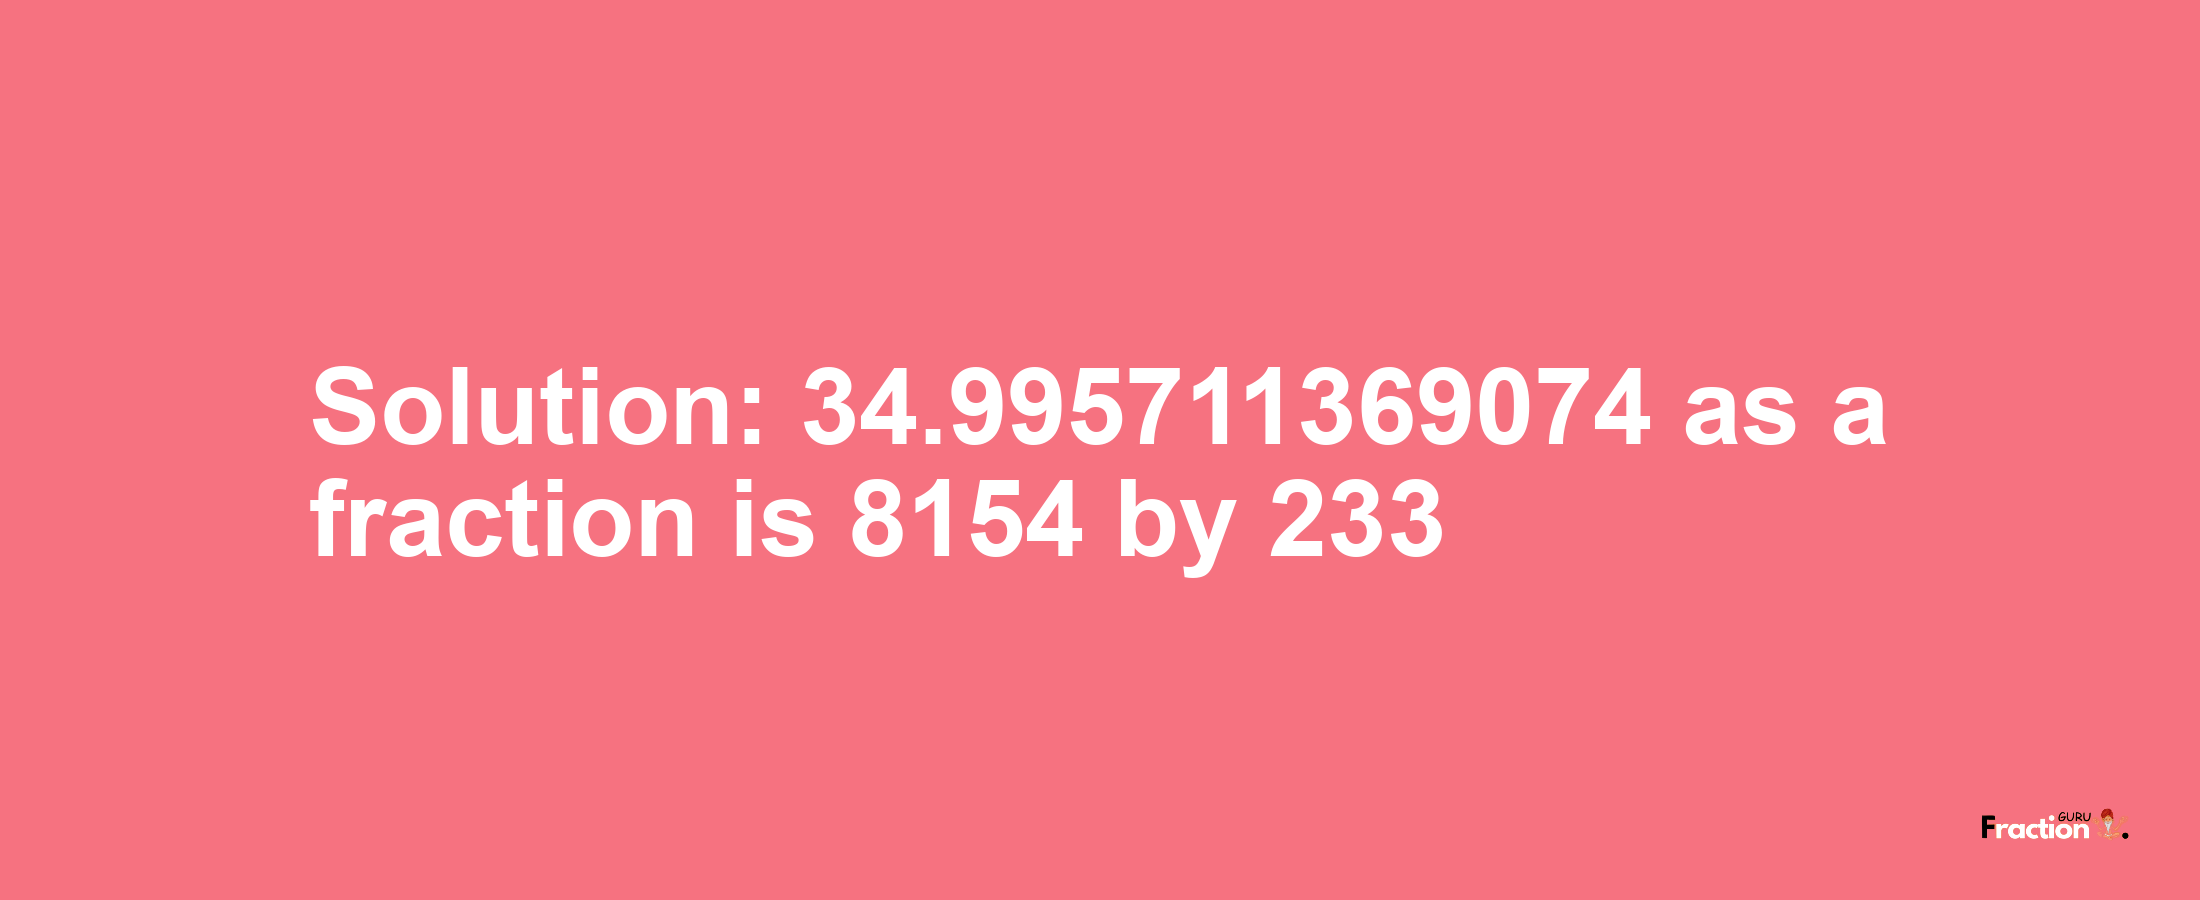 Solution:34.995711369074 as a fraction is 8154/233